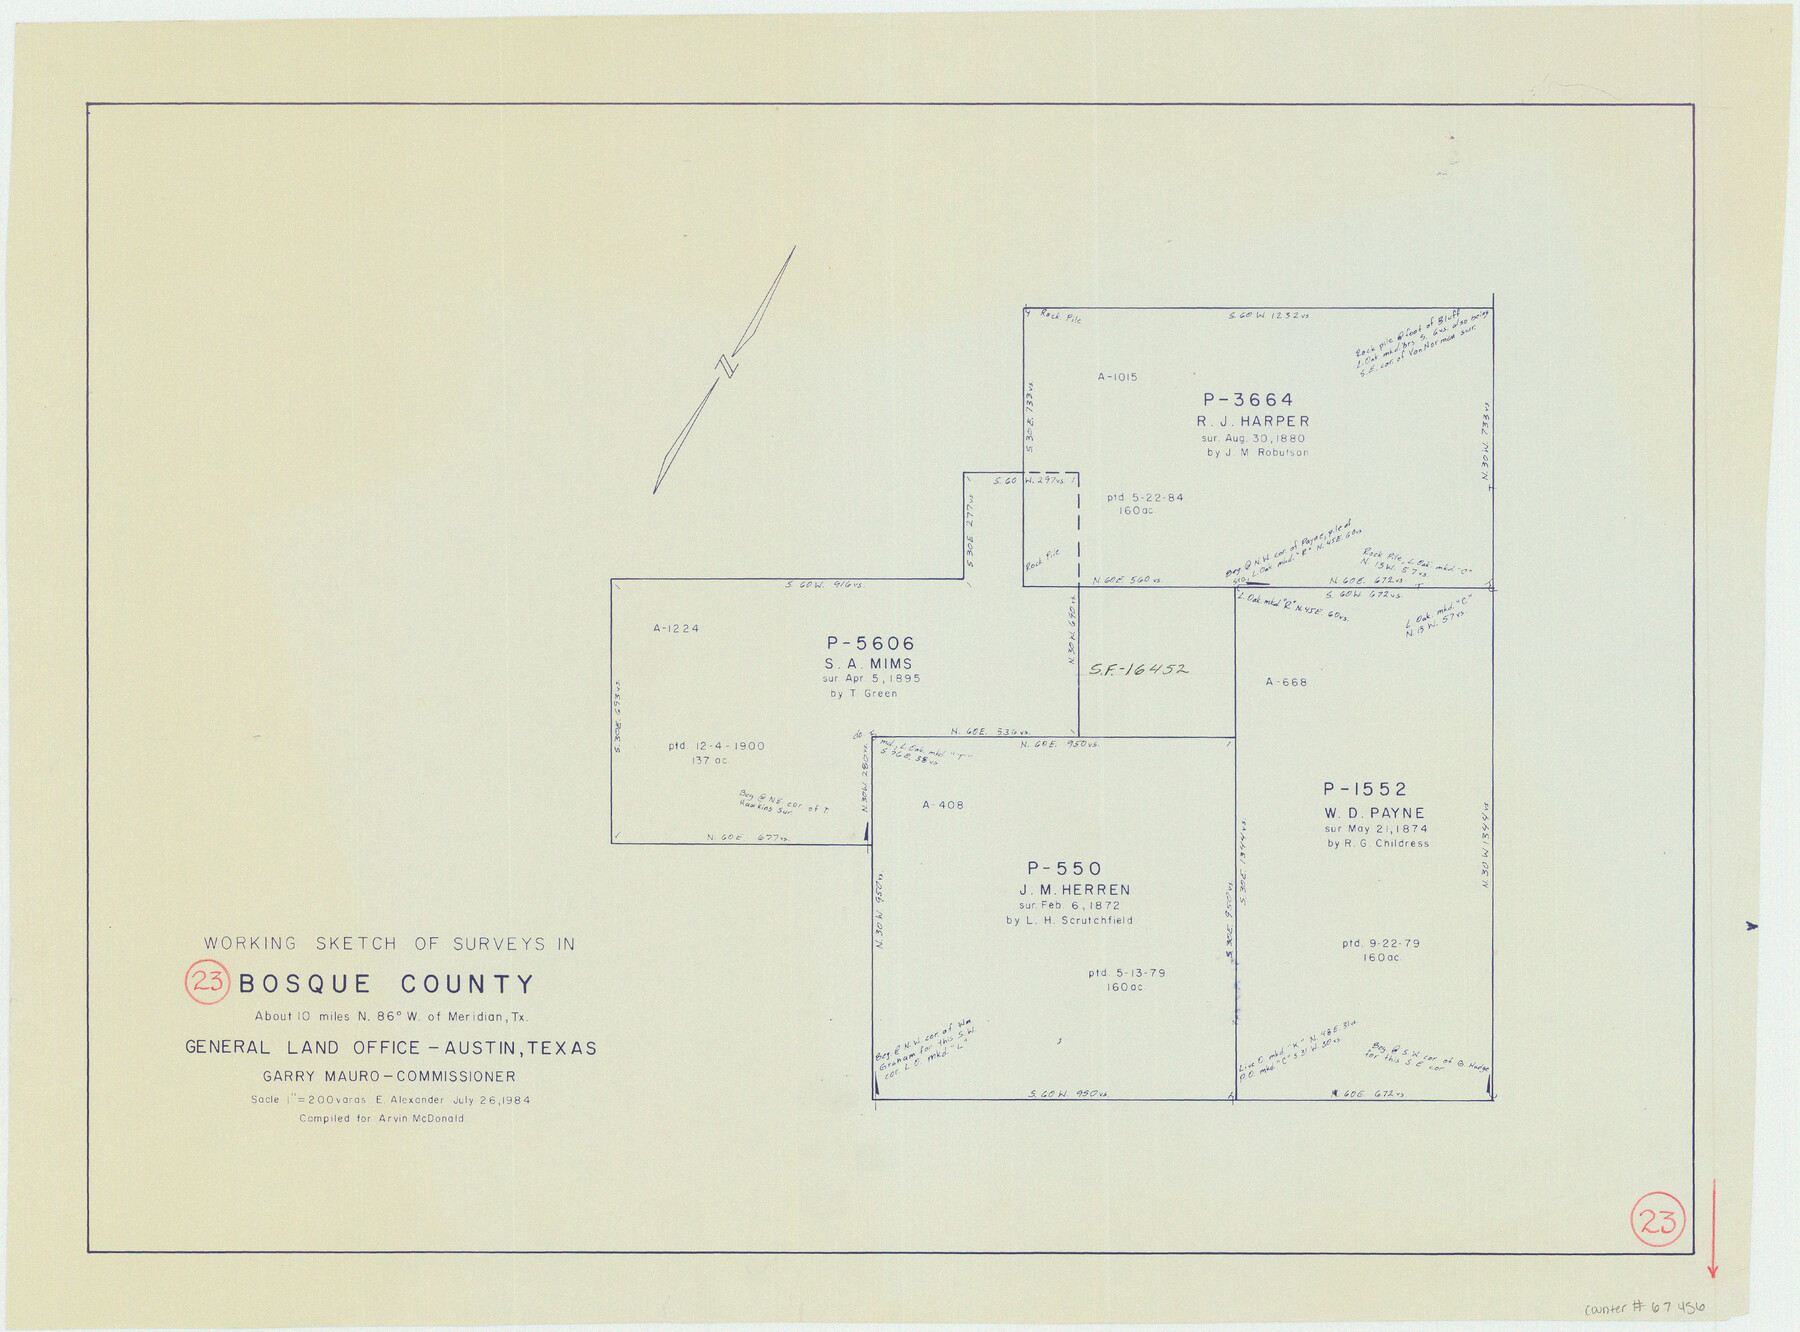 67456, Bosque County Working Sketch 23, General Map Collection